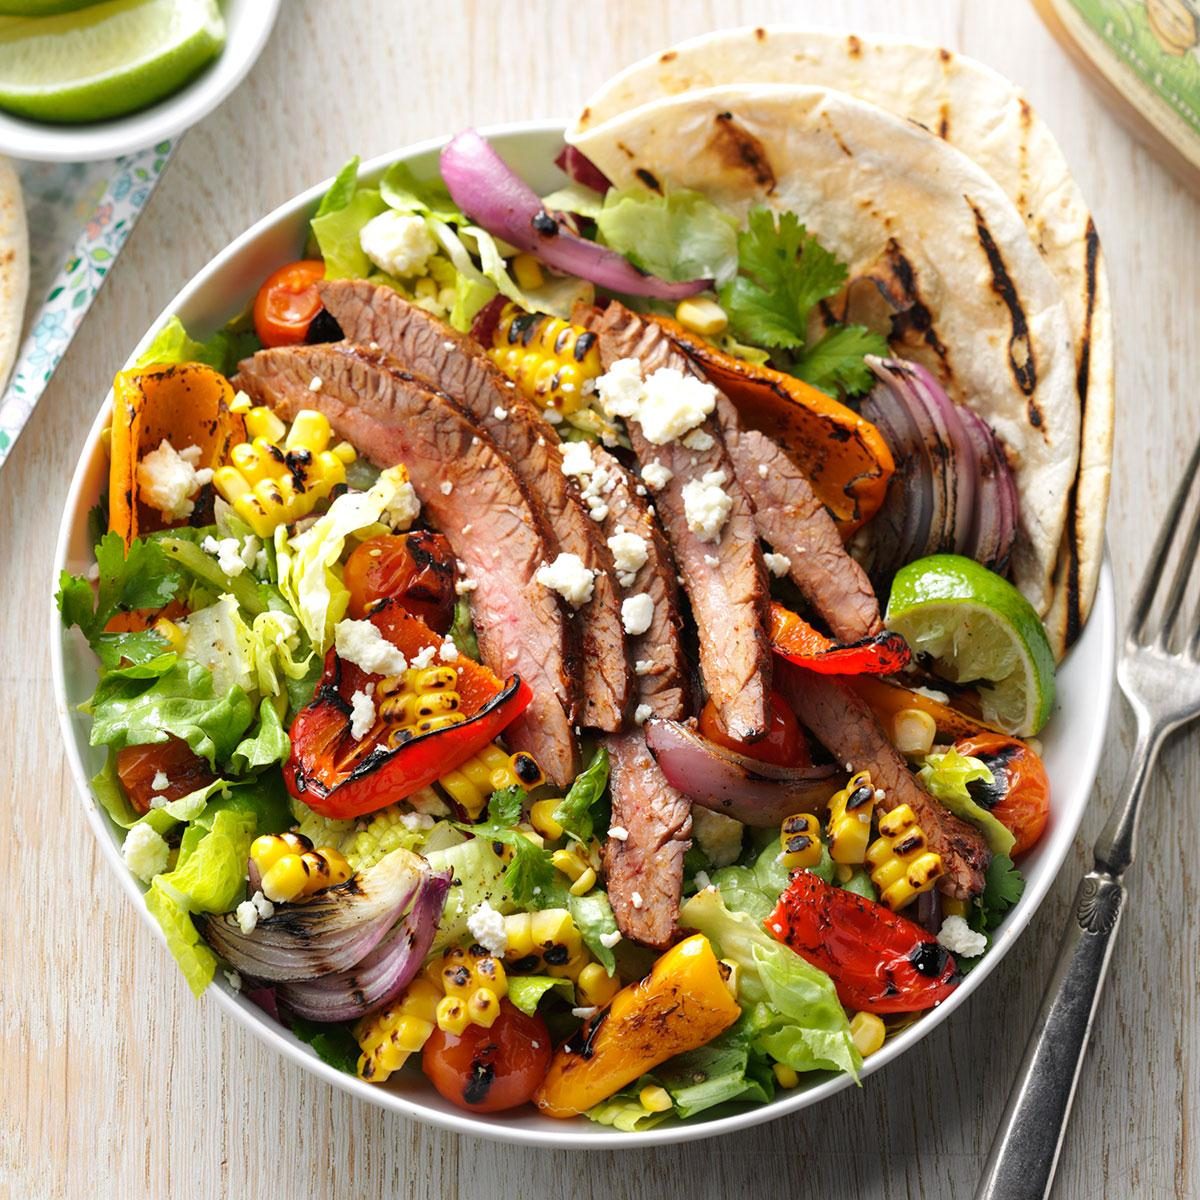 <p>Pull out the skewers and take a stab at grilling peppers, onions and corn for an awesome steak salad that’s all summer and smoke. —Taste of Home Test Kitchen, Milwaukee, Wisconsin</p> <div class="listicle-page__buttons"> <div class="listicle-page__cta-button"><a href='https://www.tasteofhome.com/recipes/fajita-in-a-bowl/'>Go to Recipe</a></div> </div>